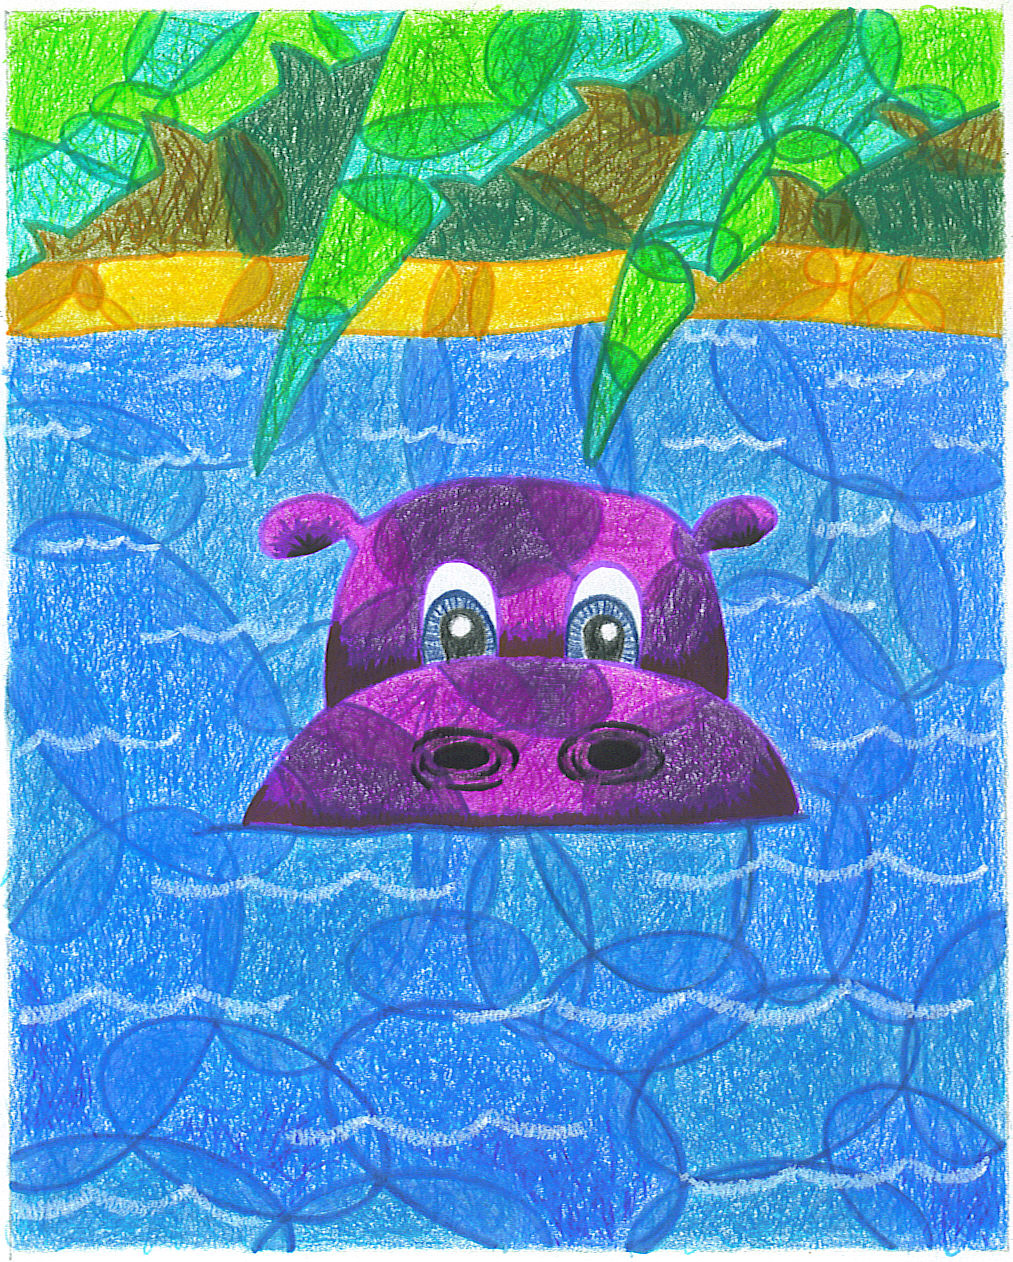 [Extremely+Purple+Hippo.jpg]